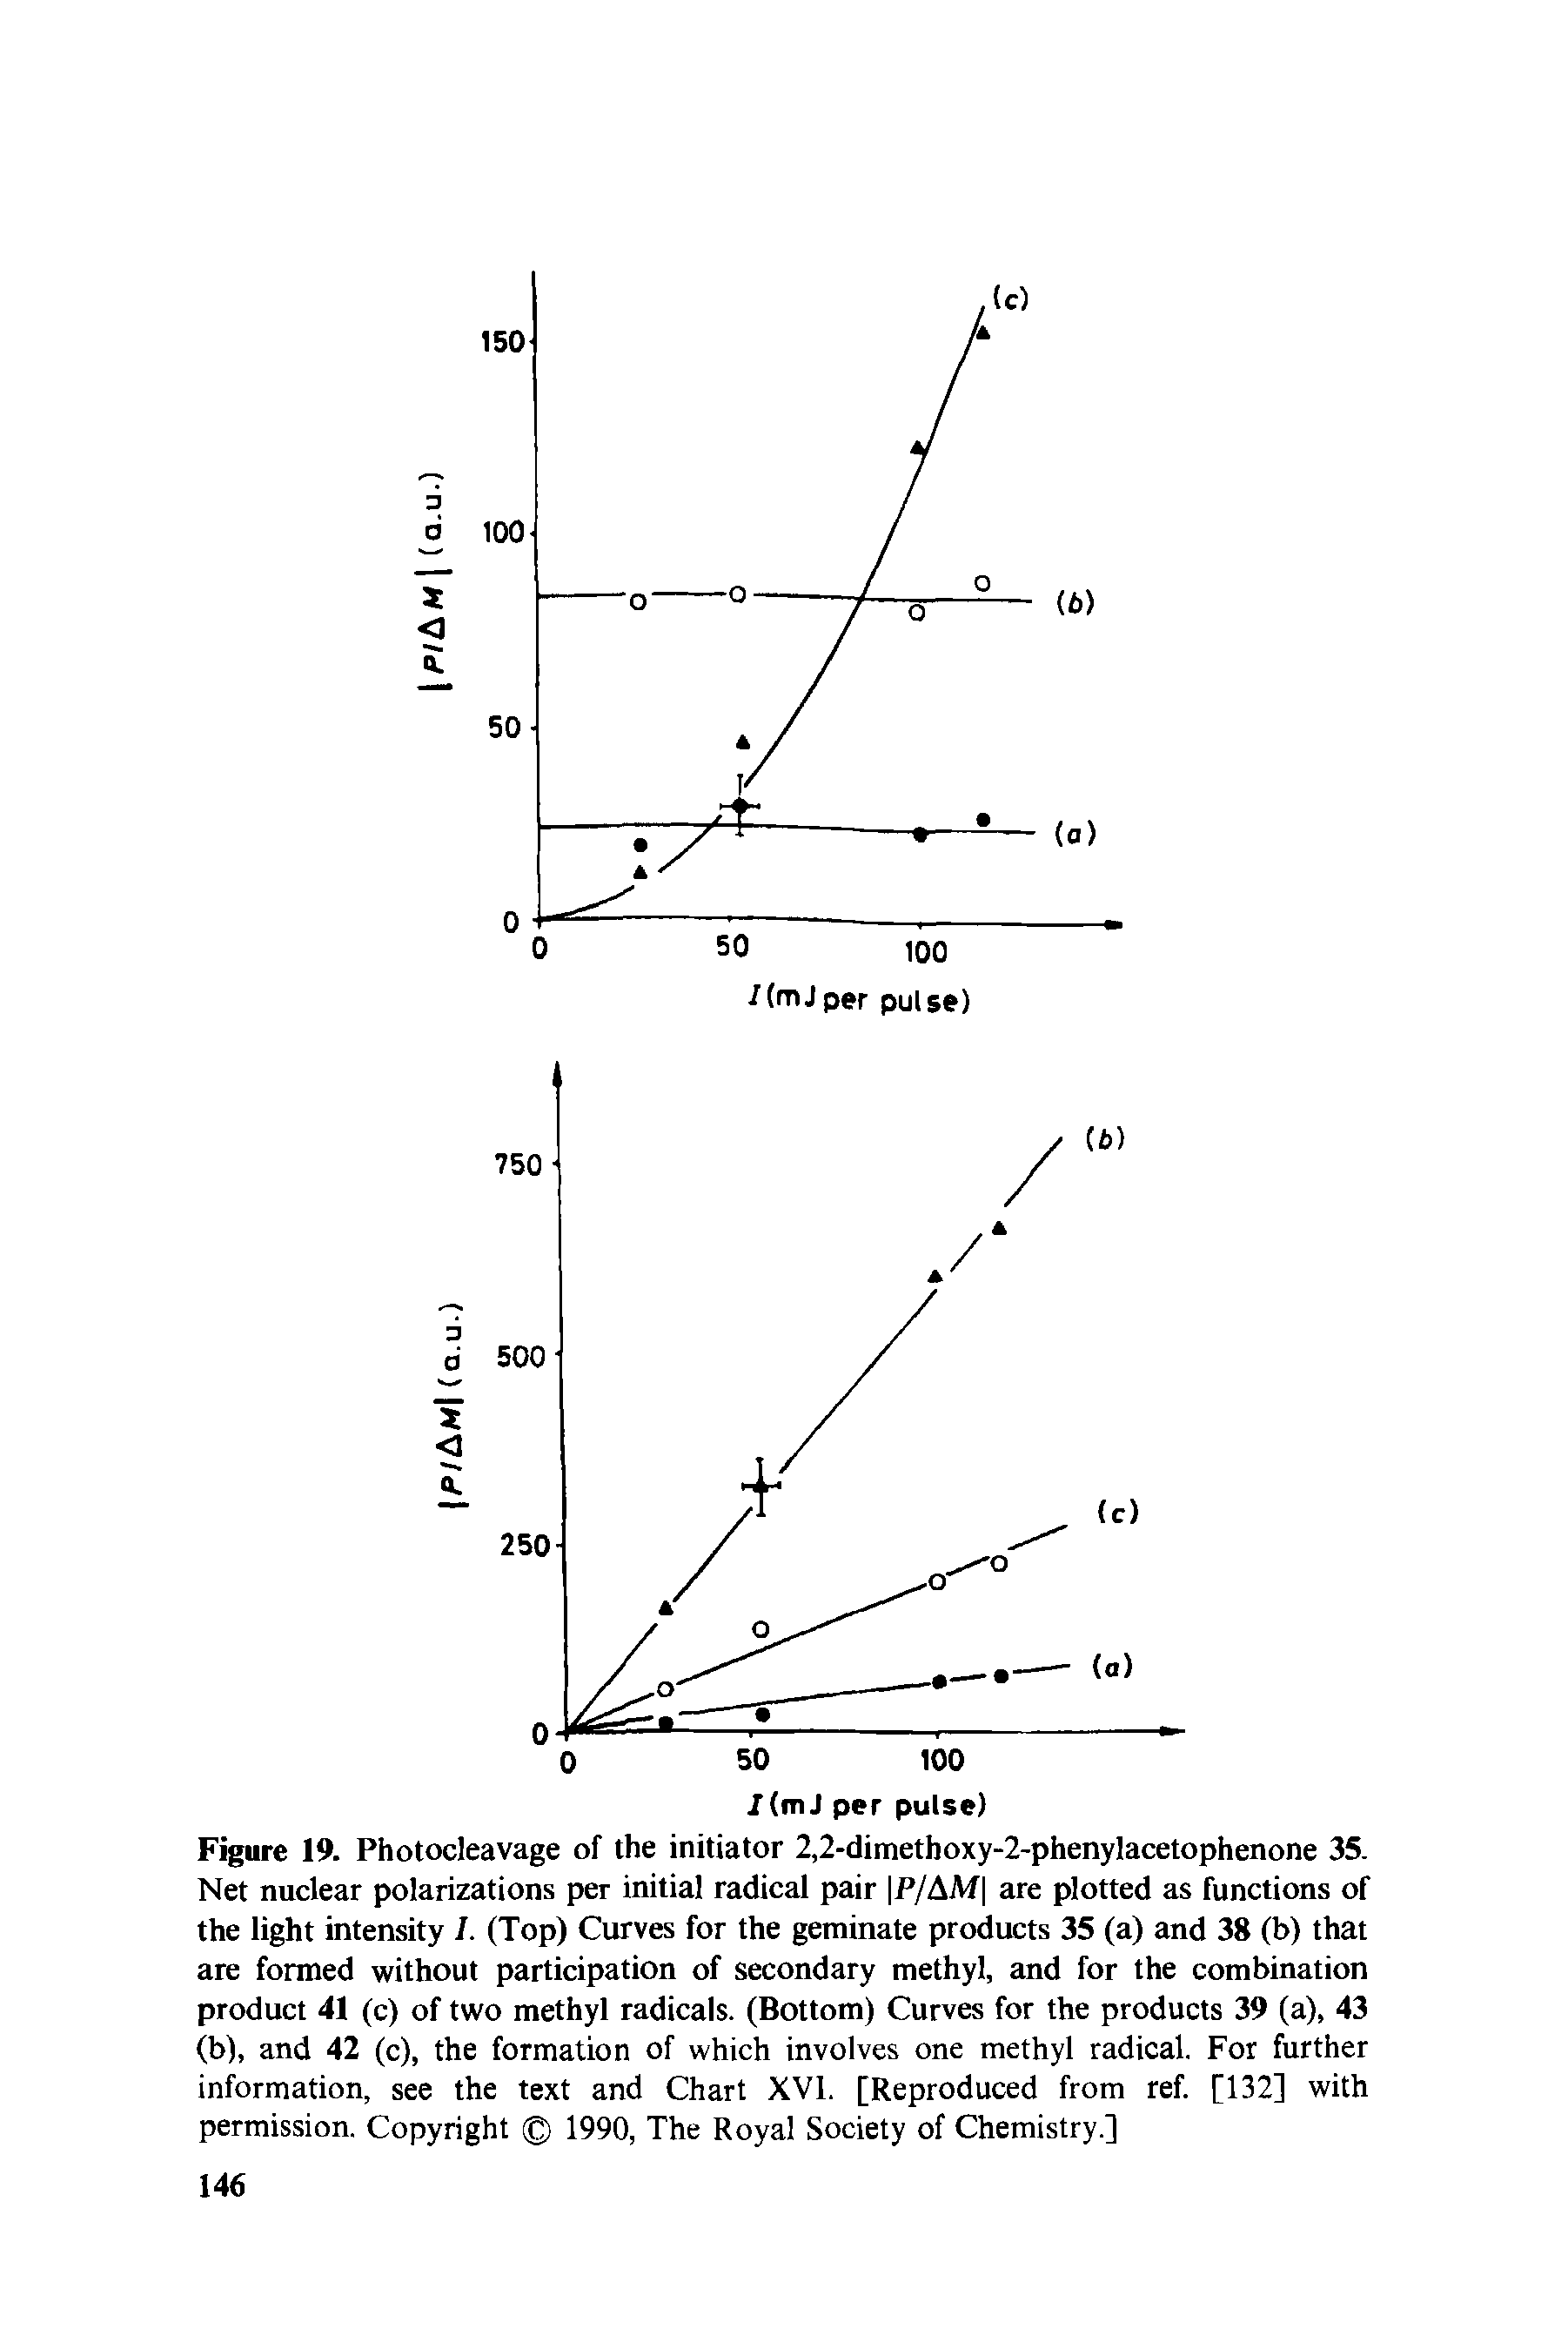 Figure 19. Photocleavage of the initiator 2,2-dimethoxy-2-phenylacetophenone 35. Net nuclear polarizations per initial radical pair P/AM are plotted as functions of the light intensity /. (Top) Curves for the geminate products 35 (a) and 38 (b) that are formed without participation of secondary methyl, and for the combination product 41 (c) of two methyl radicals. (Bottom) Curves for the products 39 (a), 43 (b), and 42 (c), the formation of which involves one methyl radical. For further information, see the text and Chart XVI. [Reproduced from ref. [132] with permission. Copyright 1990, The Royal Society of Chemistry.]...